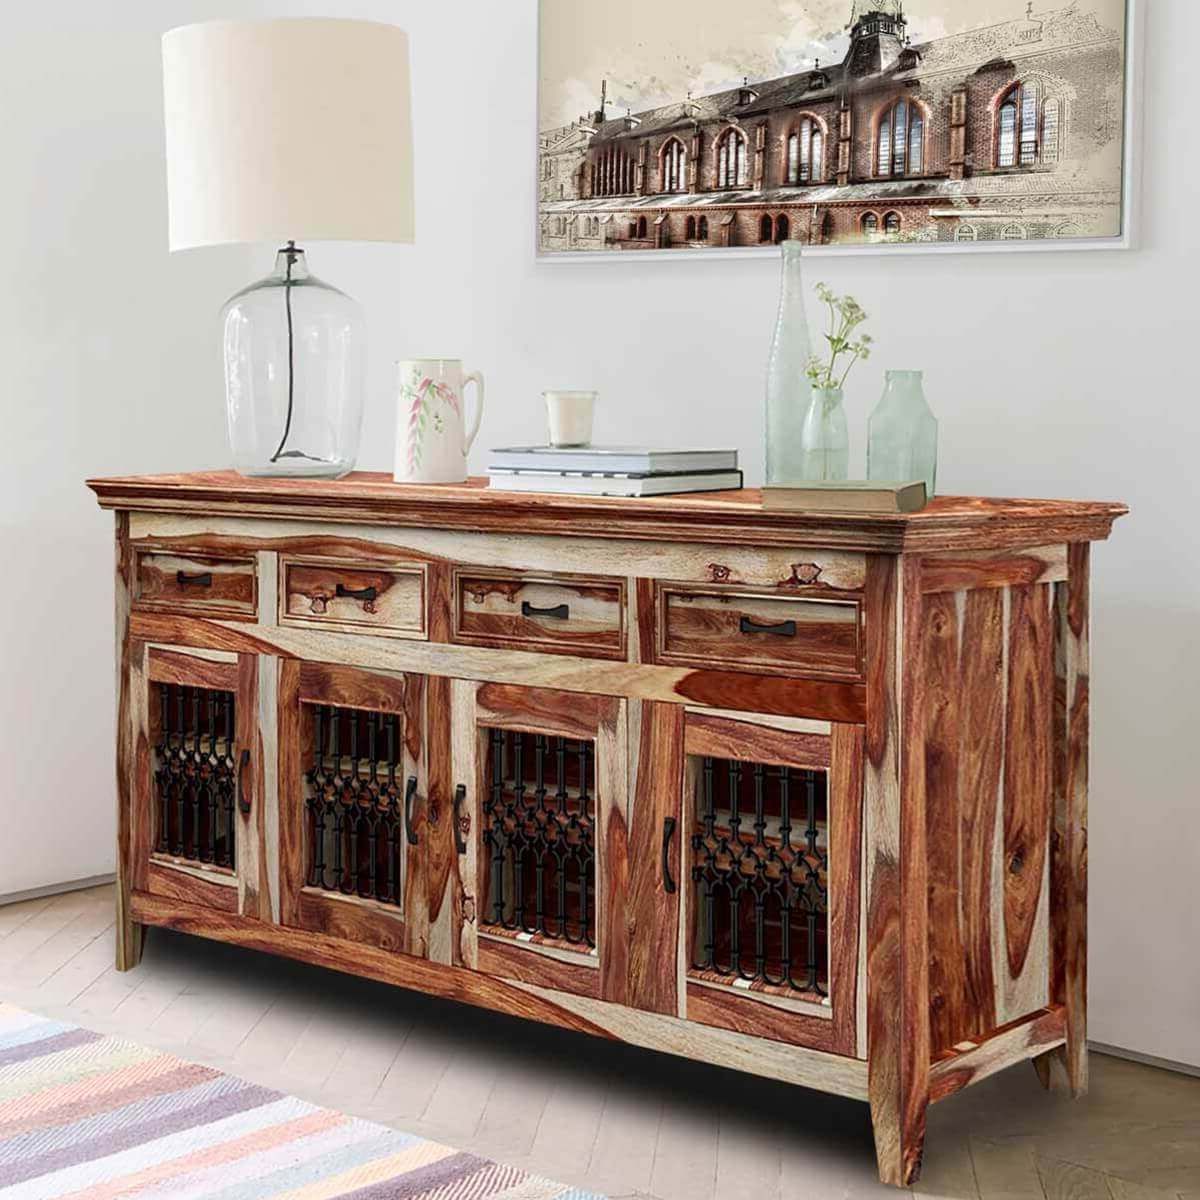 Peoria Modern Rustic Solid Wood 4 Door 4 Drawer Large Buffet Cabinet With Regard To Solid Wood Contemporary Sideboards Buffets (View 8 of 20)